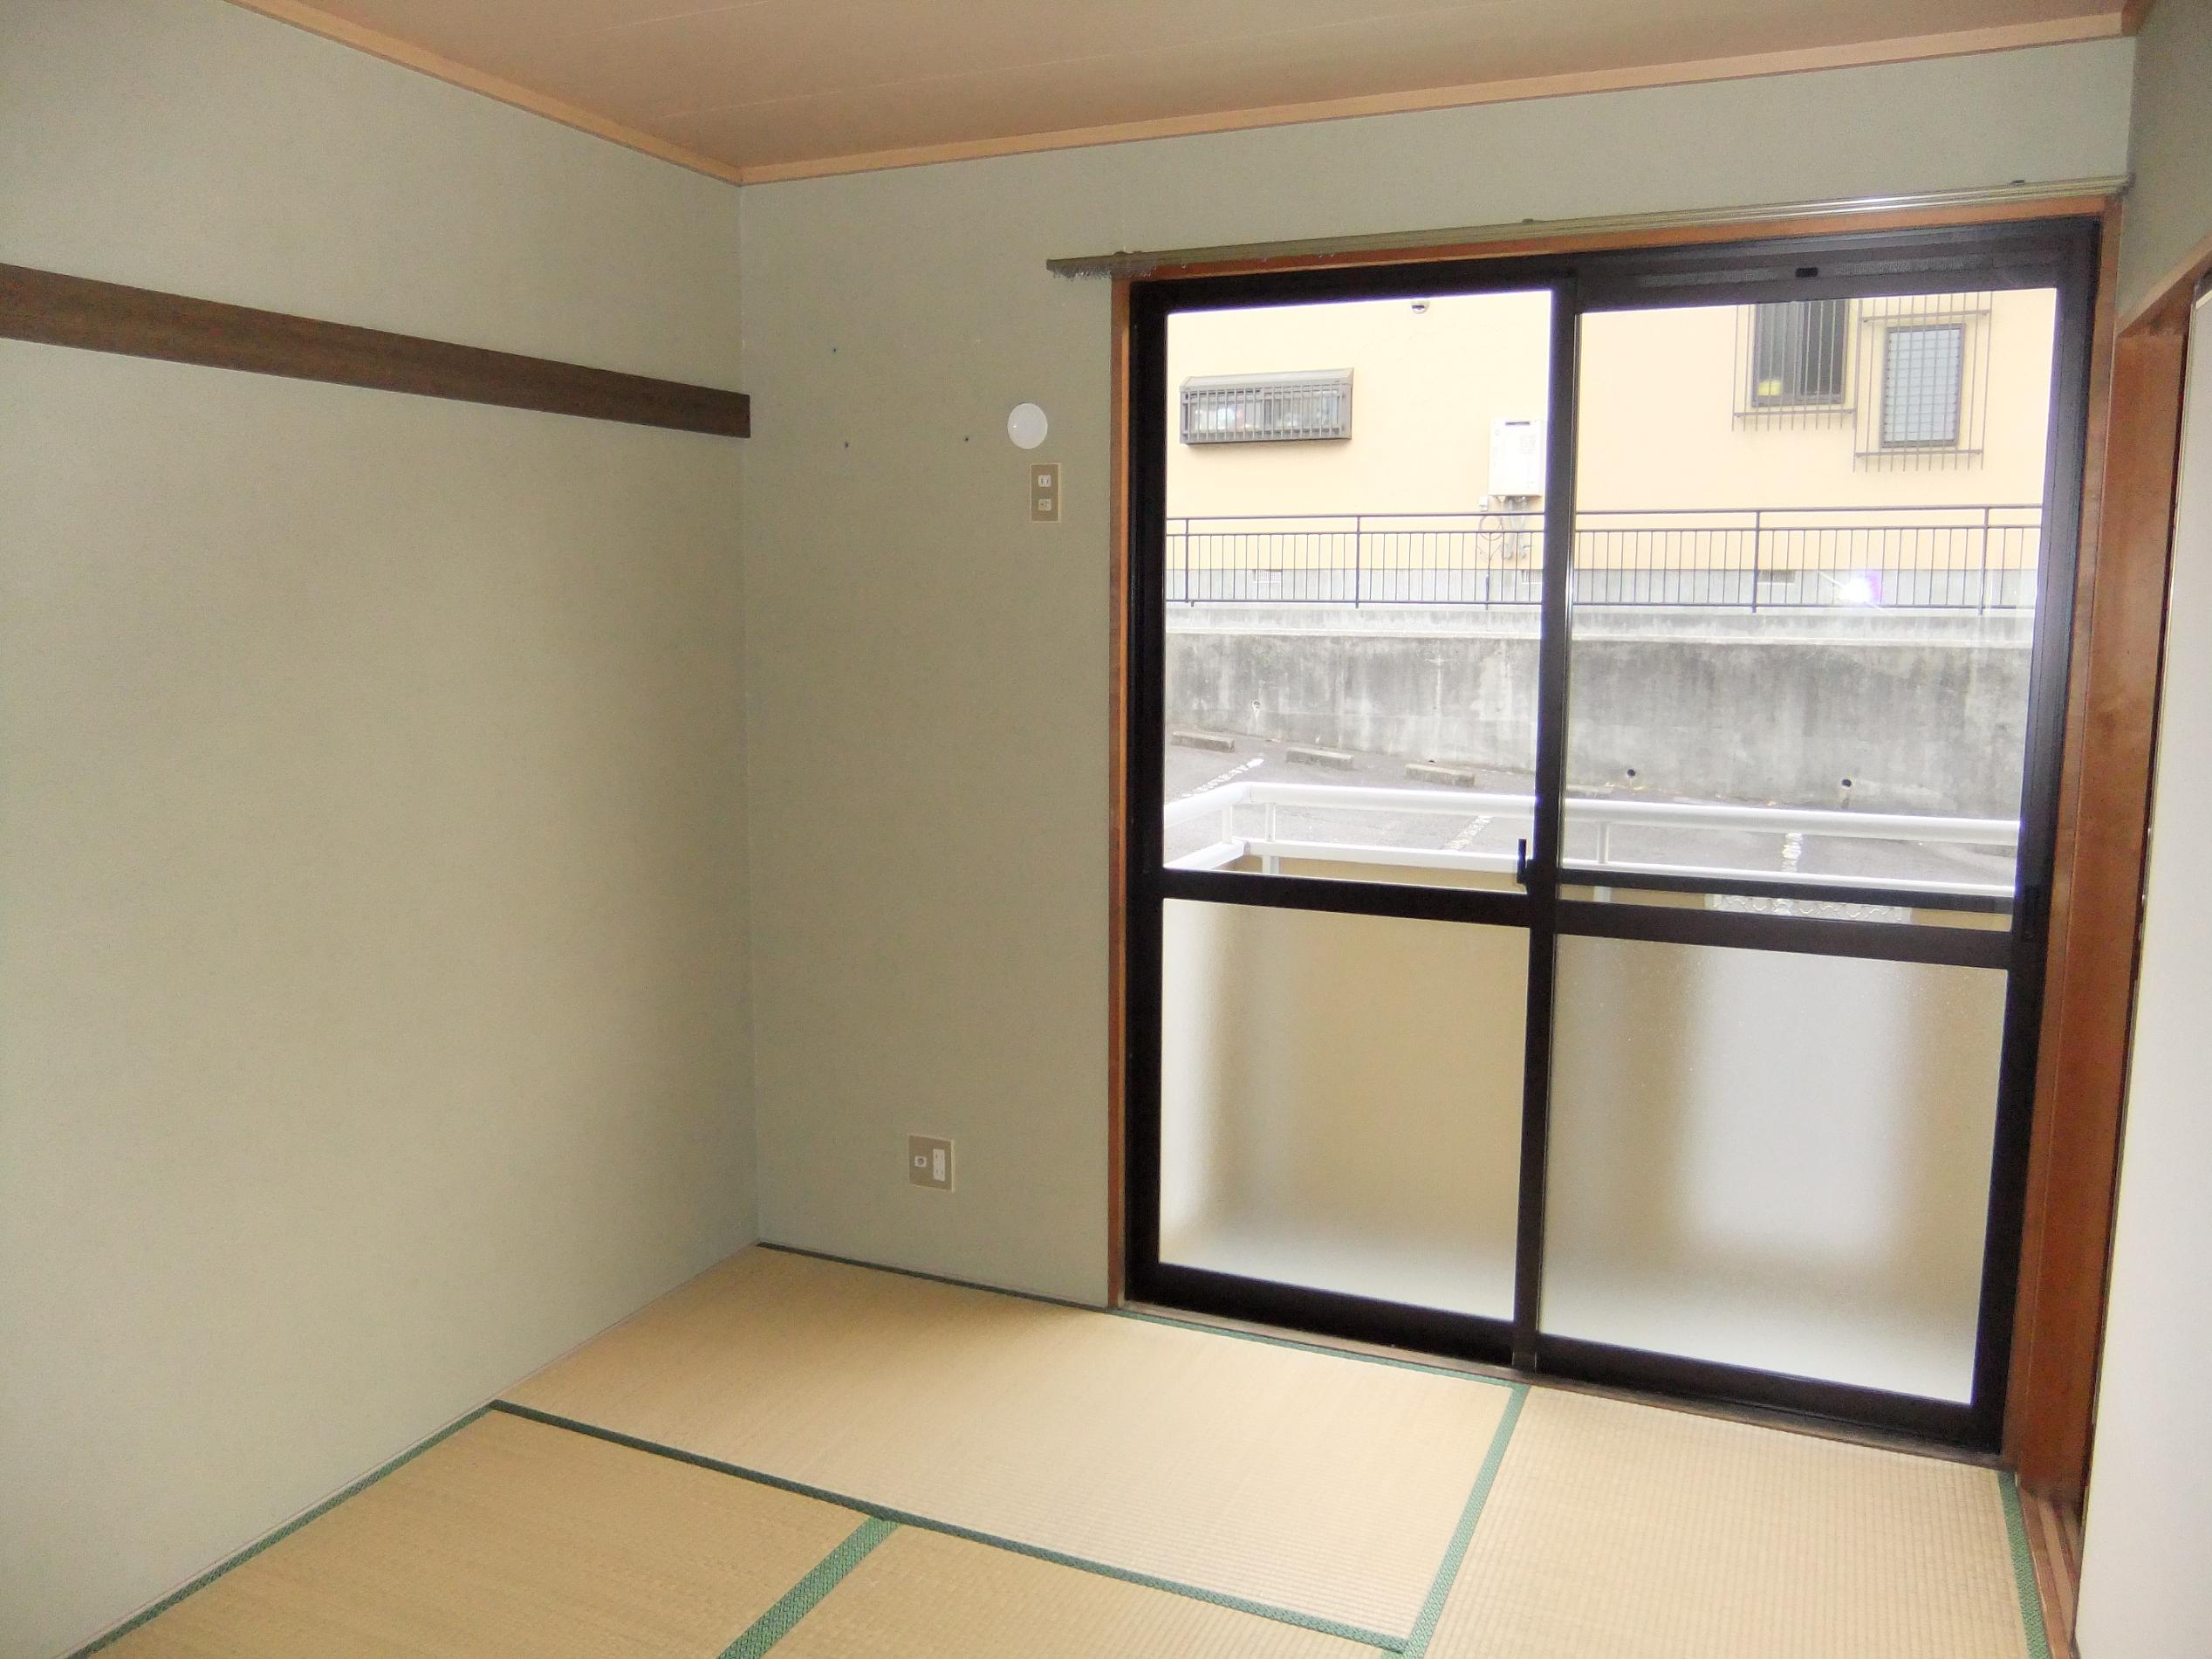 Living and room. It is the left side of the Japanese-style room from the kitchen